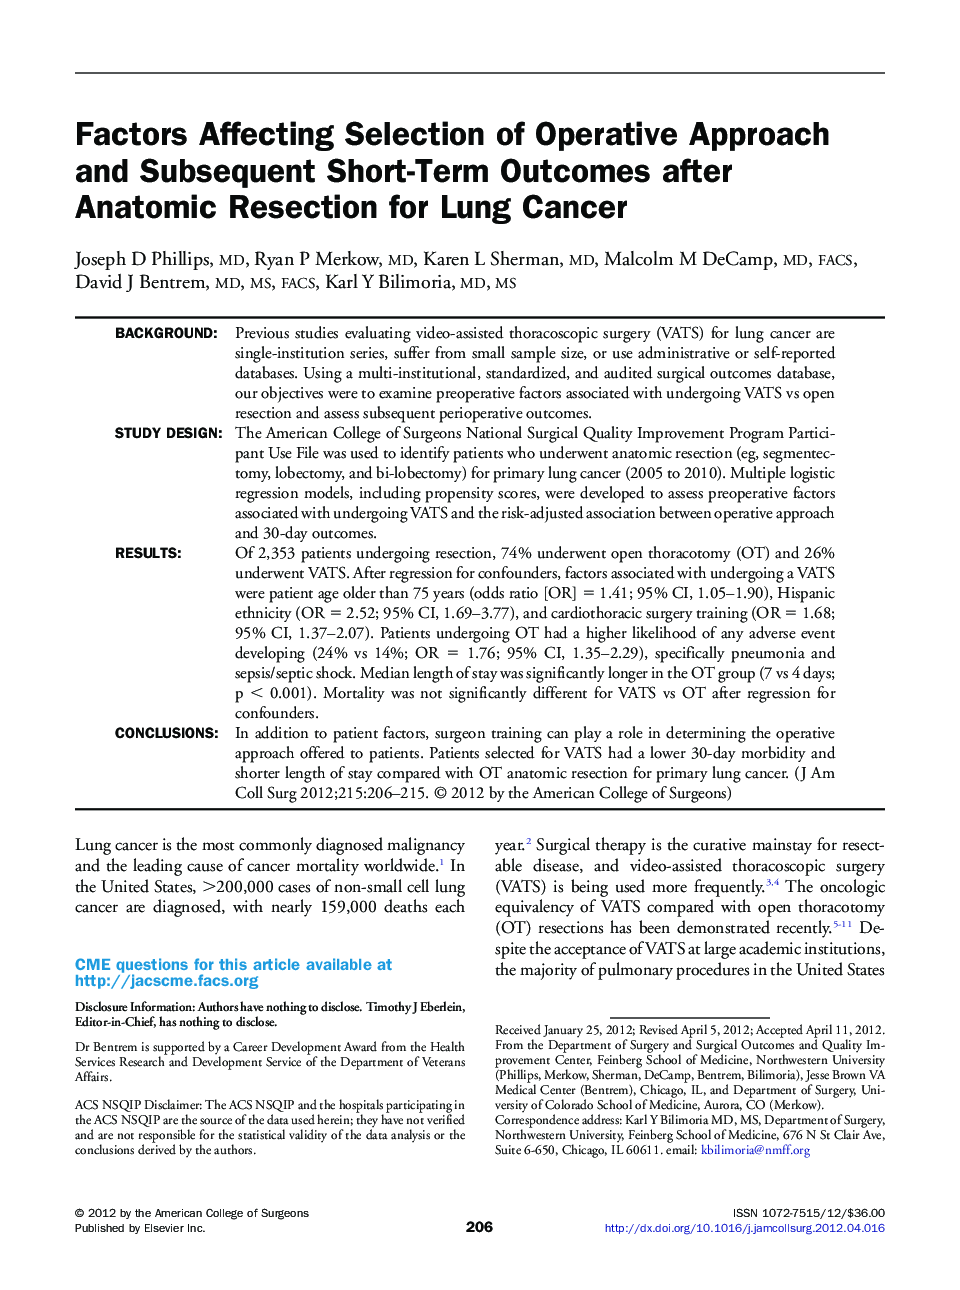 Factors Affecting Selection of Operative Approach and Subsequent Short-Term Outcomes after Anatomic Resection for Lung Cancer 